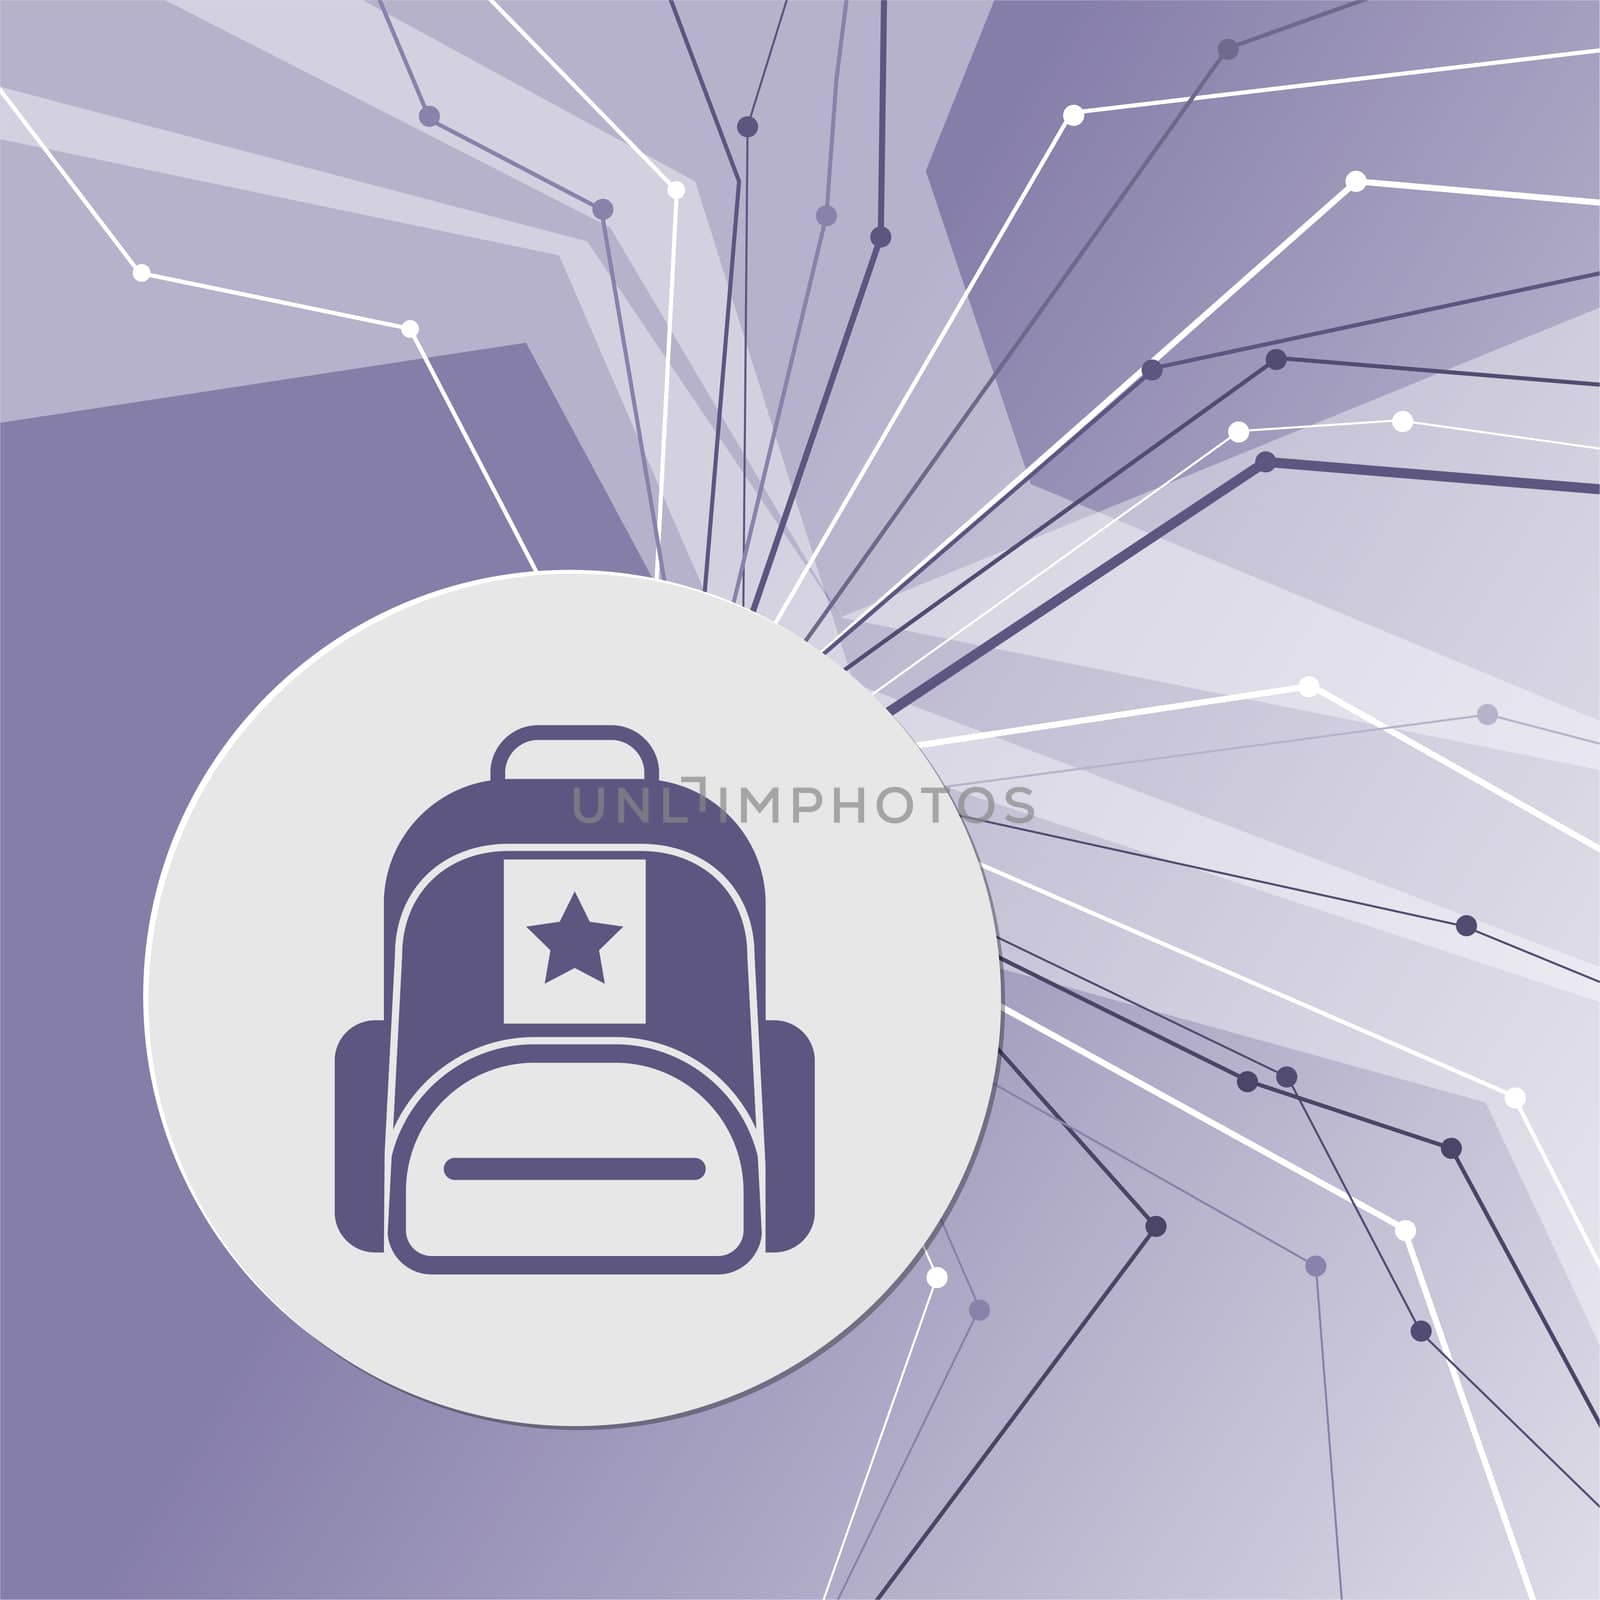 Briefcase, case, bag icon on purple abstract modern background. The lines in all directions. With room for your advertising. illustration